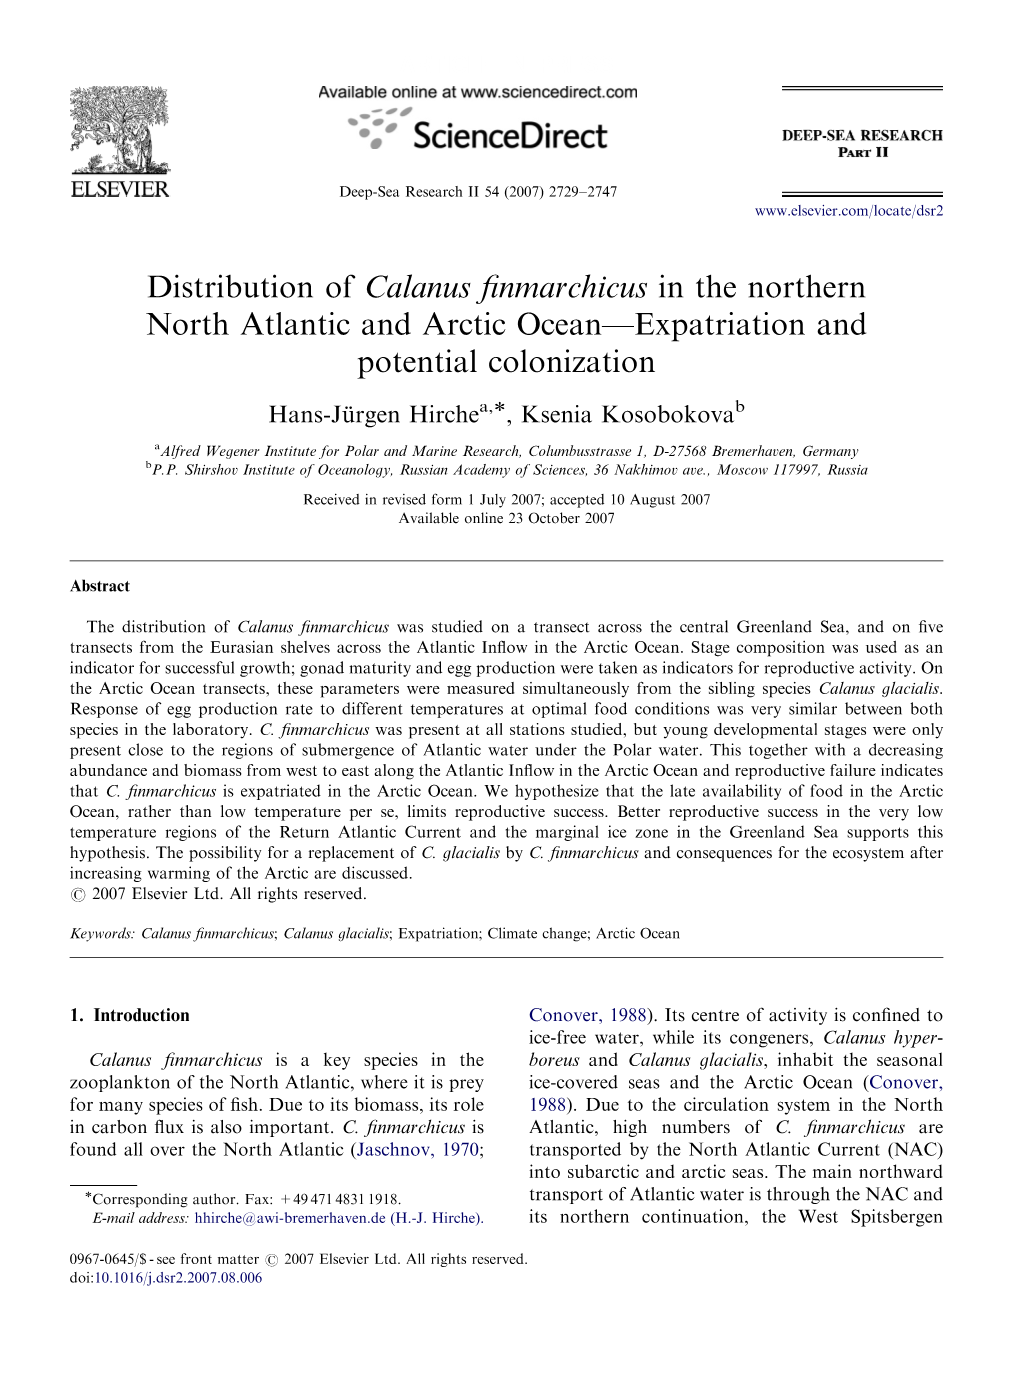 Distribution of Calanus Finmarchicus in the Northern North Atlantic and Arctic Ocean—Expatriation and Potential Colonization